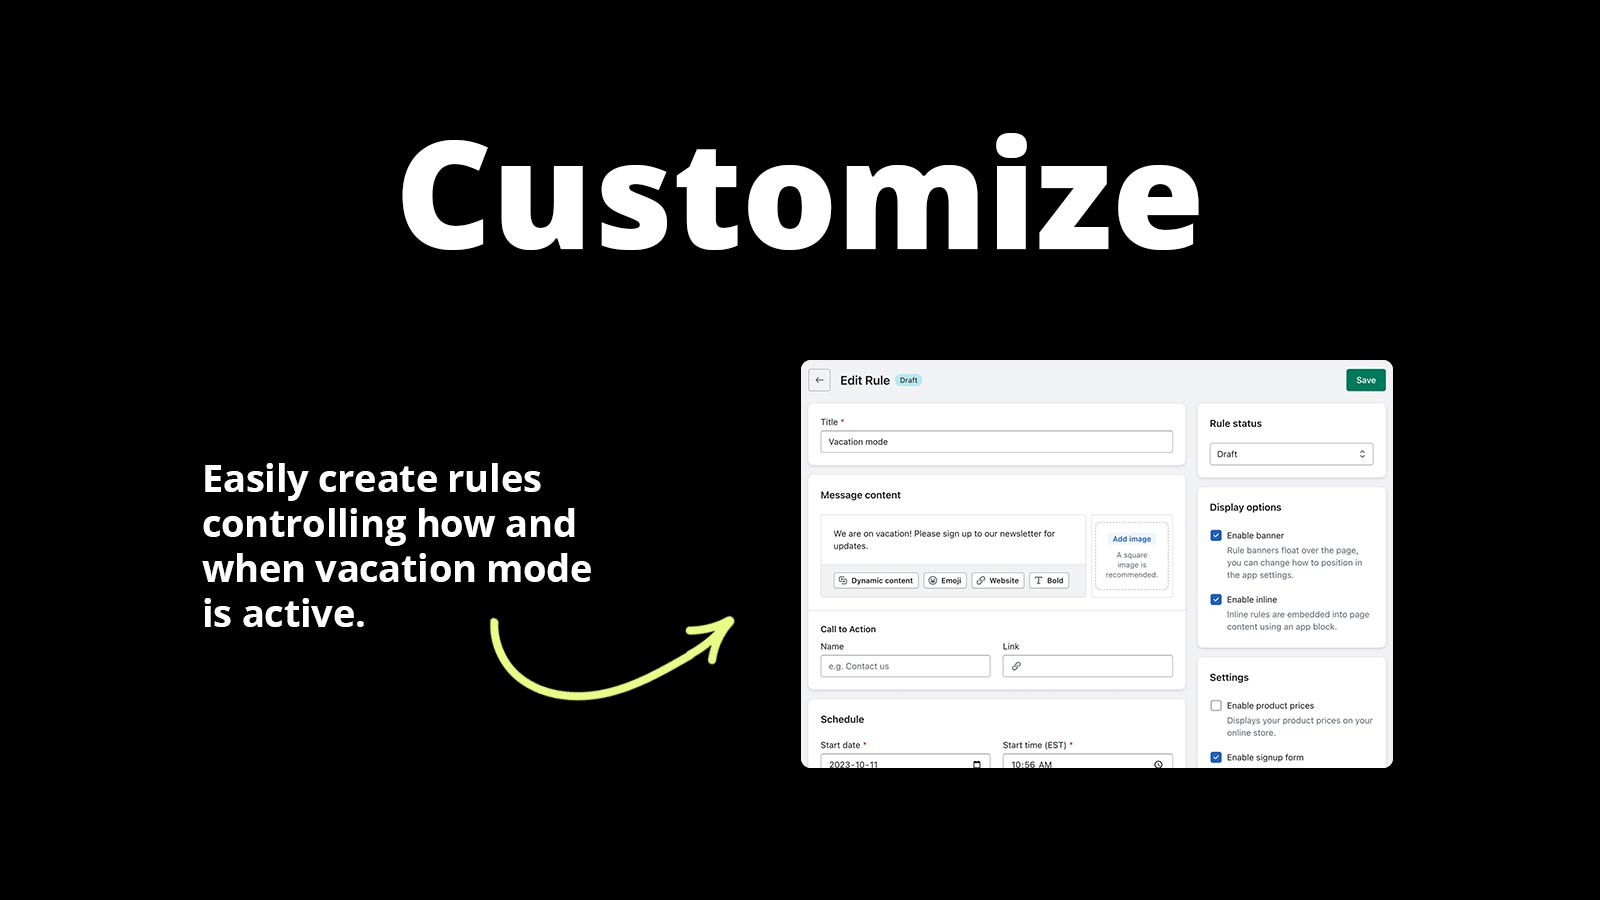 Customize. Easily create rules controlling how and when vacation mode is active.